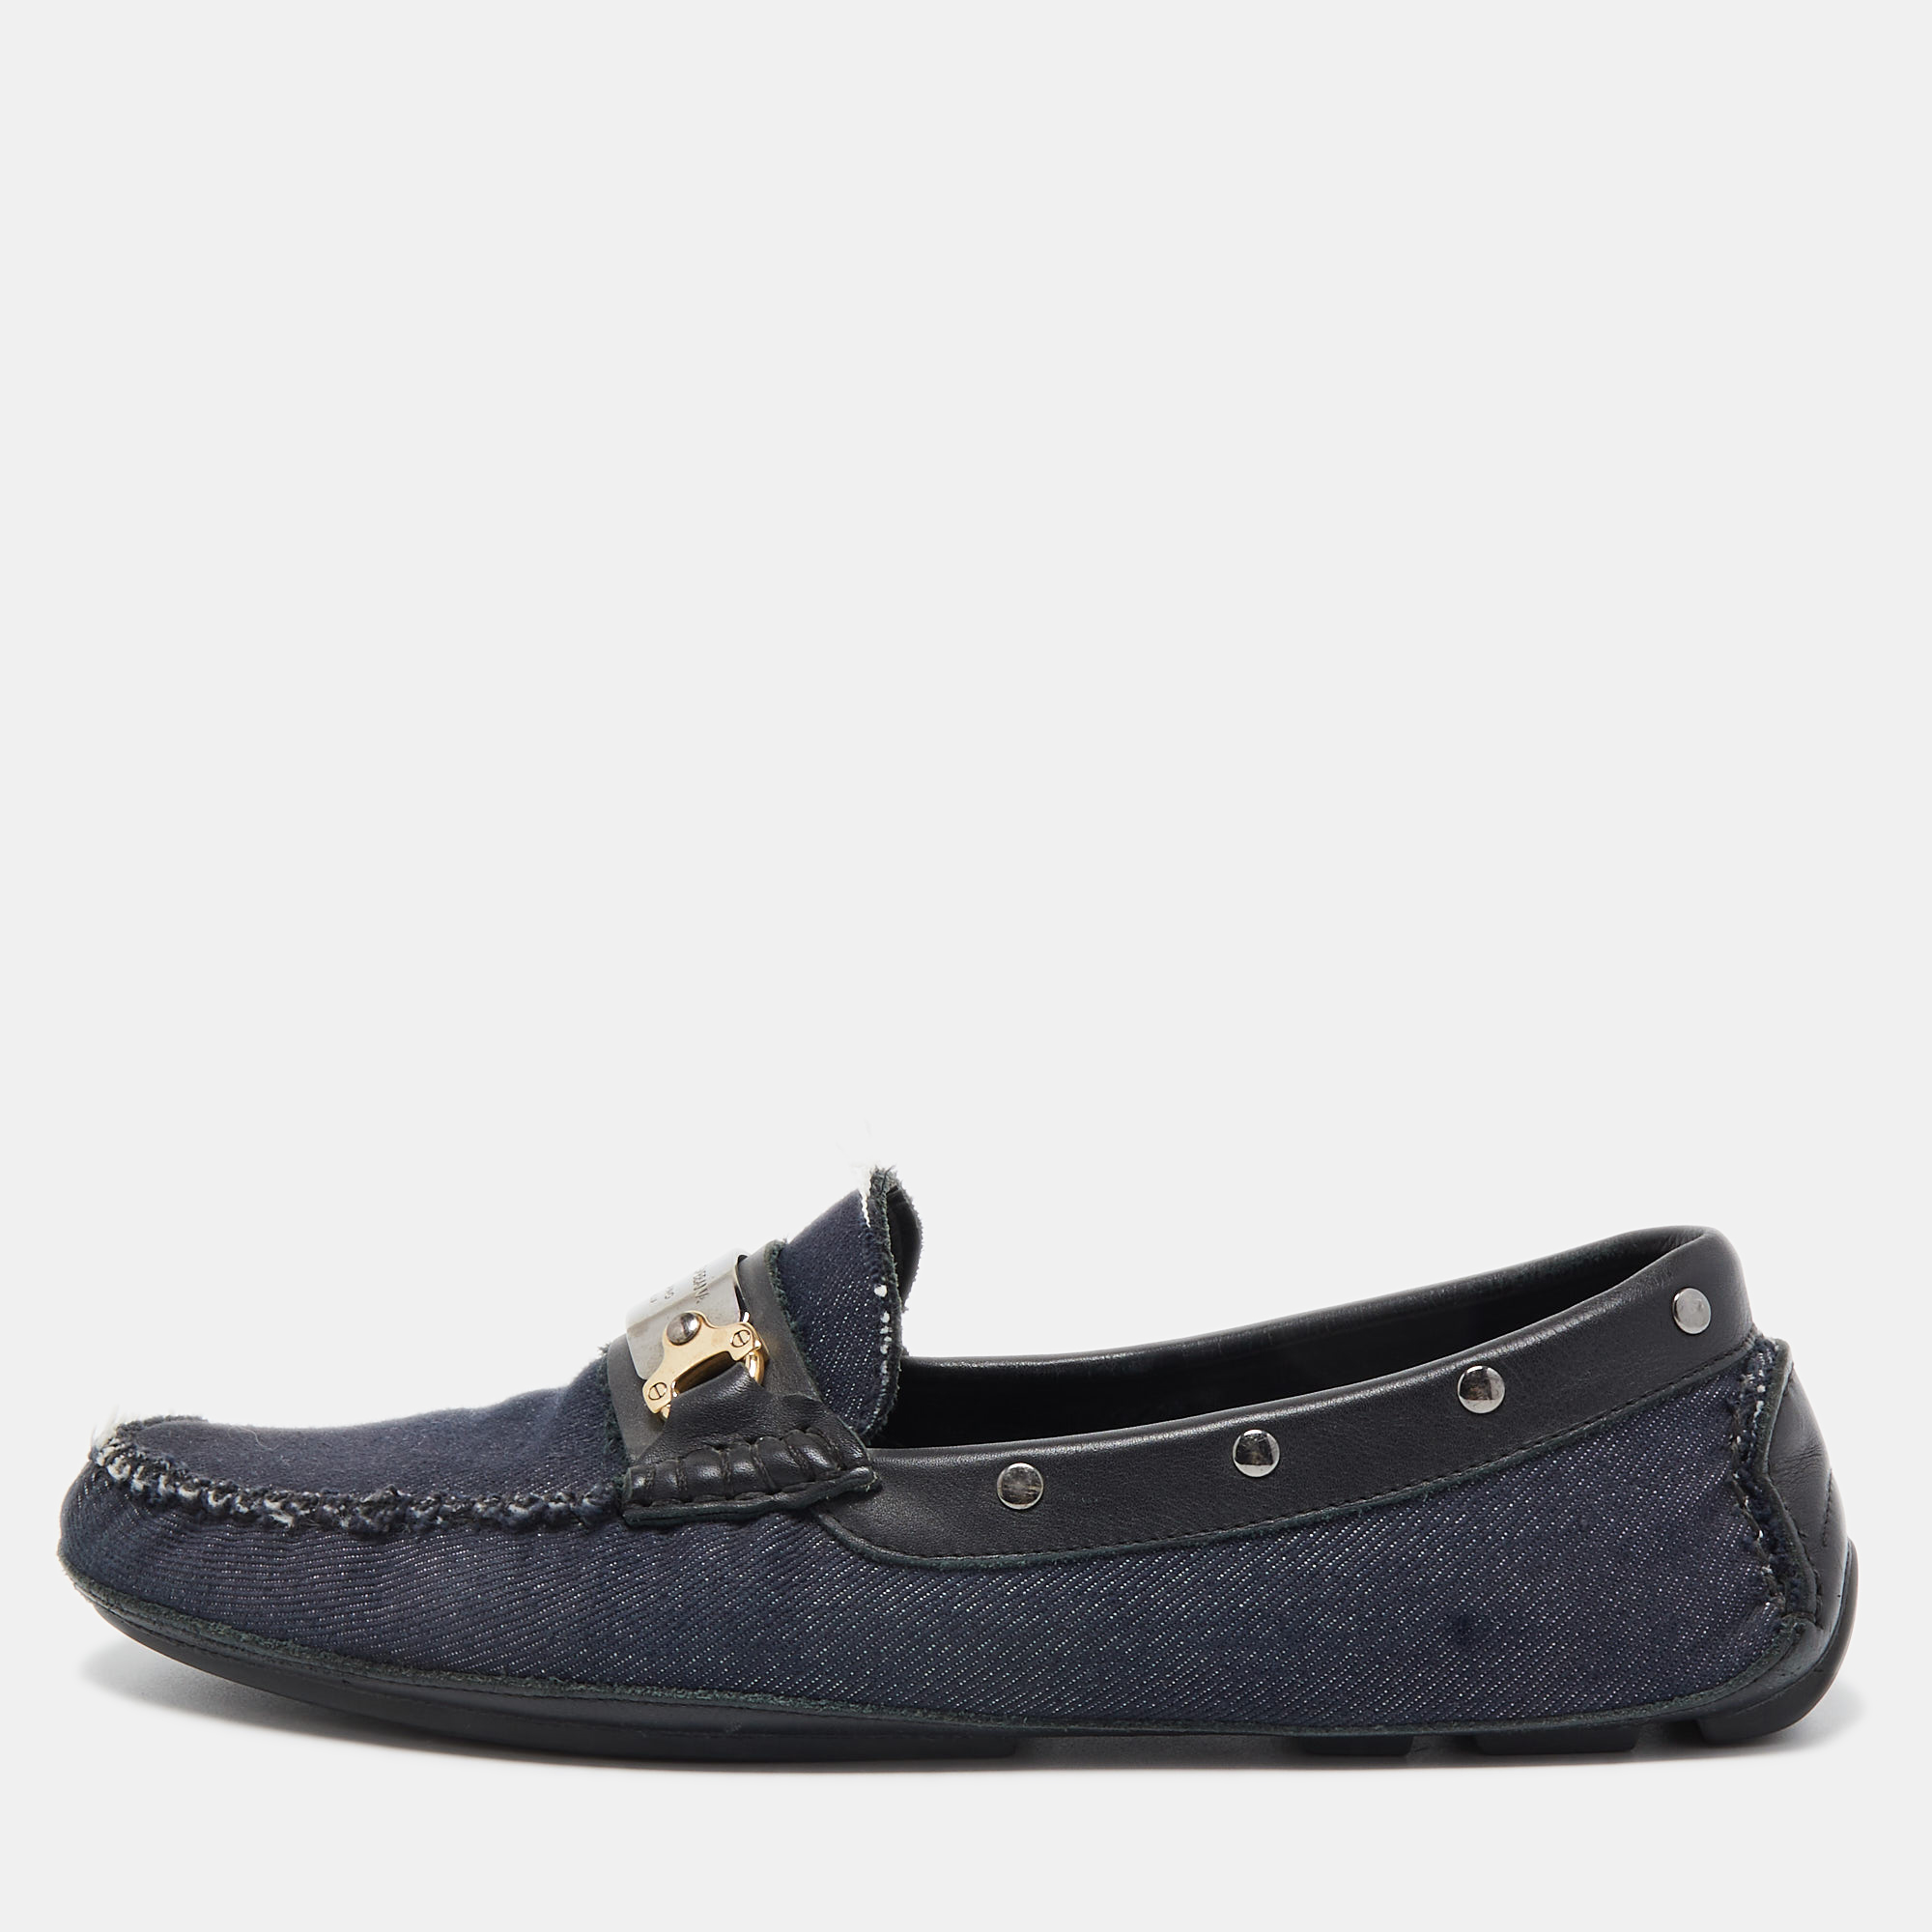 Let comfort and classic style be yours with these designer loafers from Dolce and Gabbana. Crafted with skill the high quality shoes have the perfect construction to take you through the day with utmost ease.